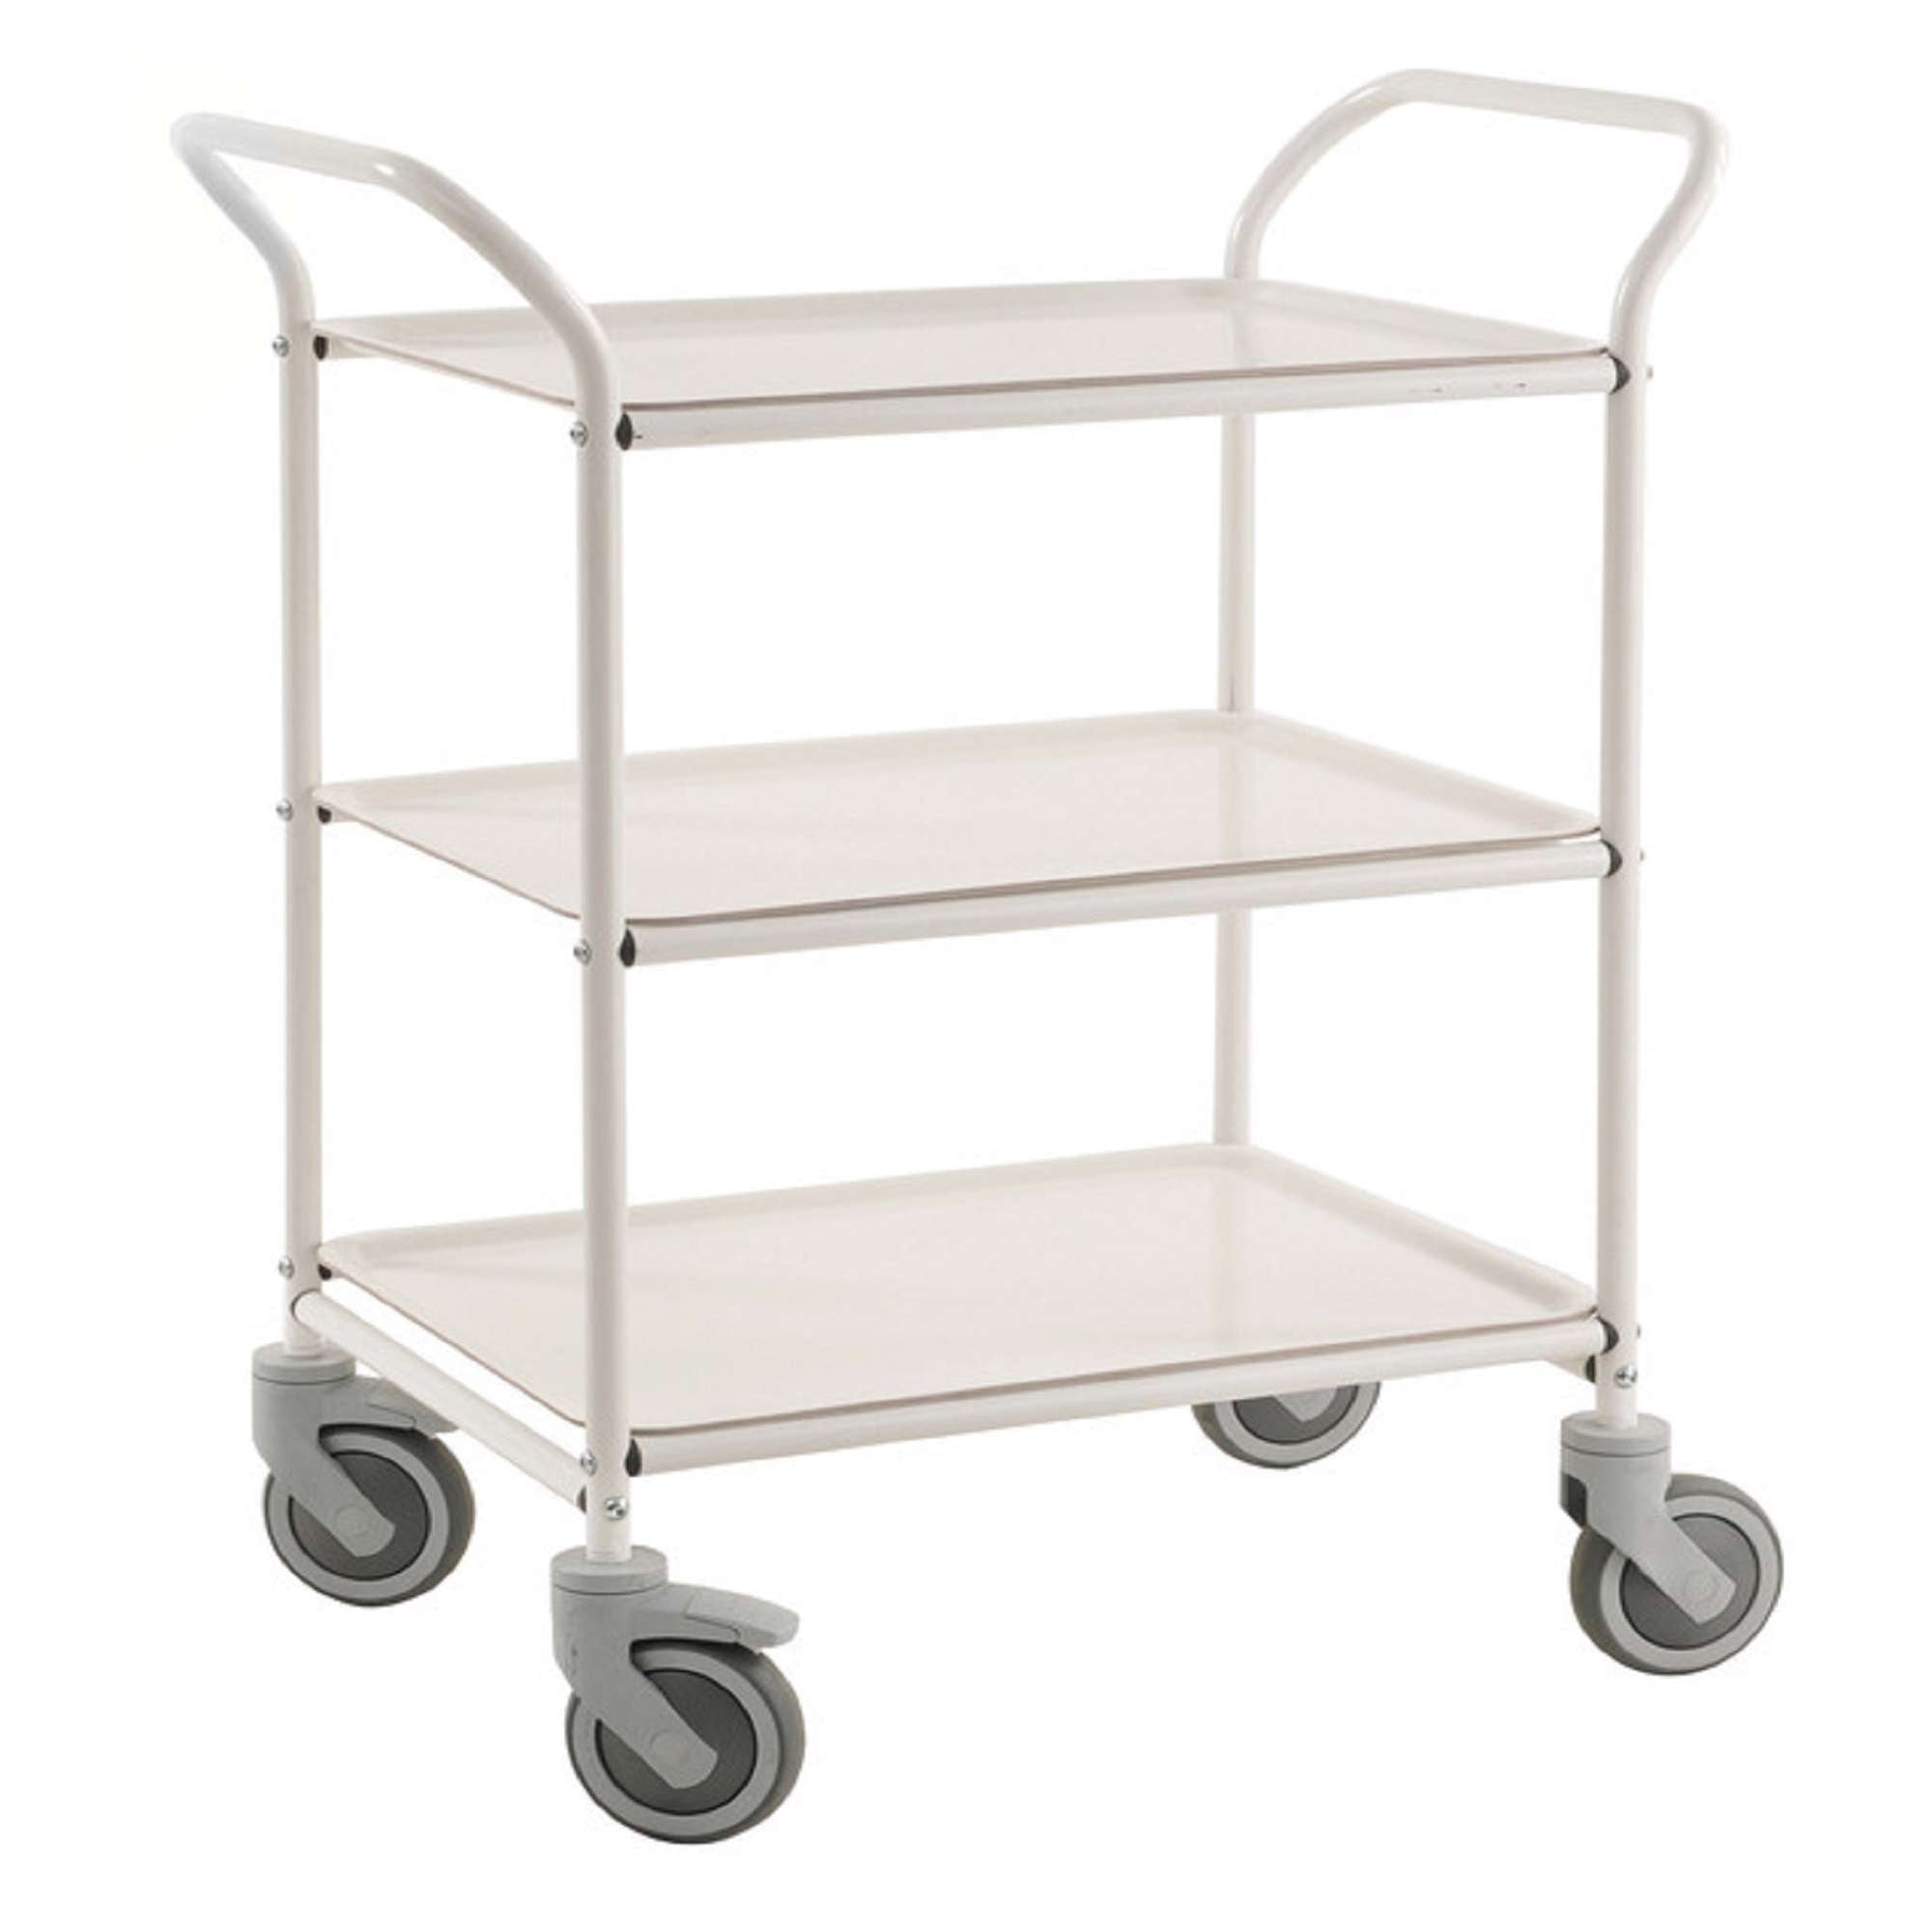 White / Anthracite grey Service trolley with 3 shelves and brake 770x495x960